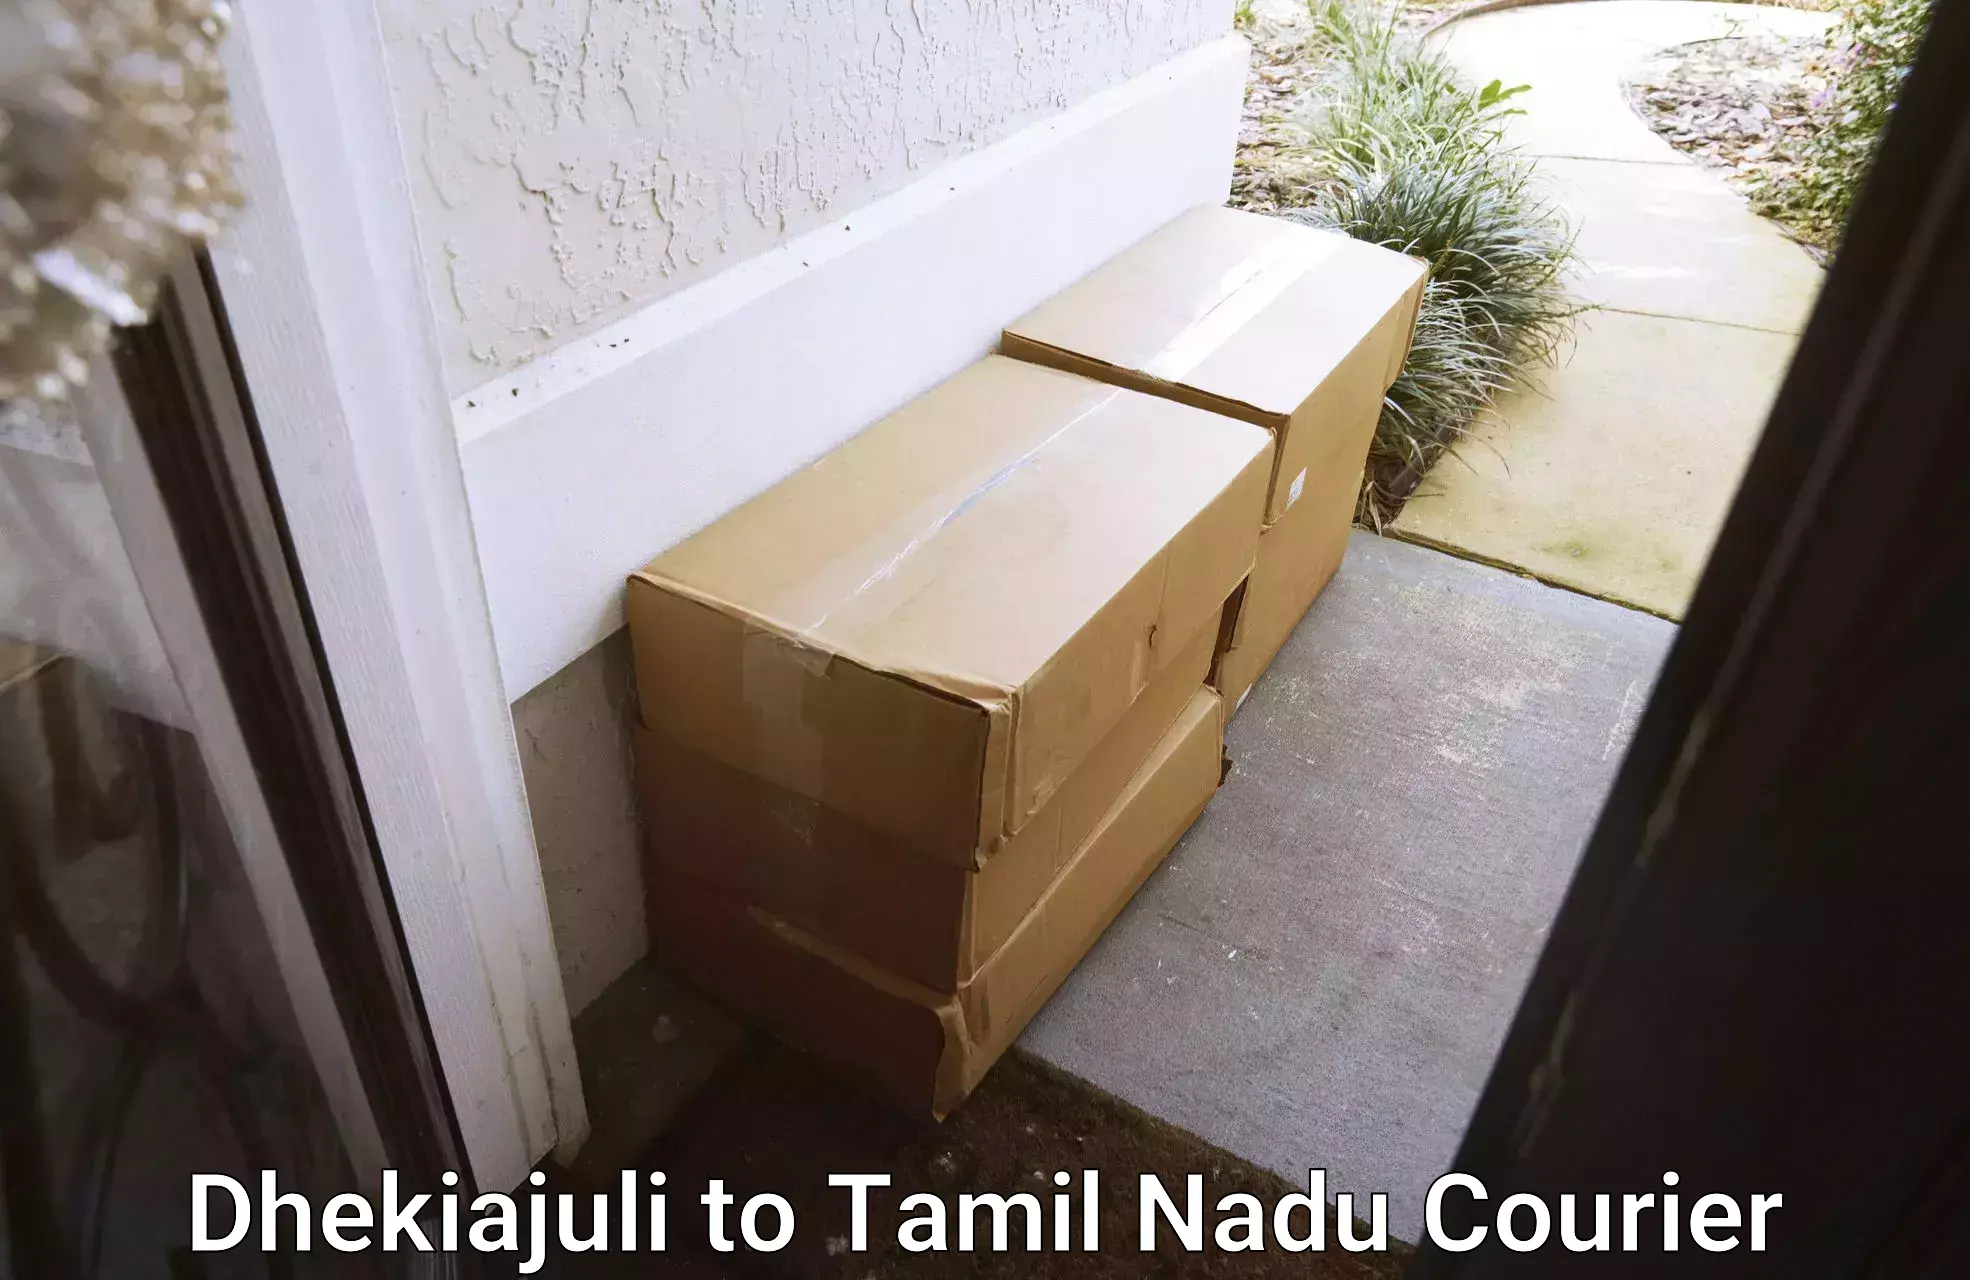 Business courier solutions Dhekiajuli to Ennore Port Chennai